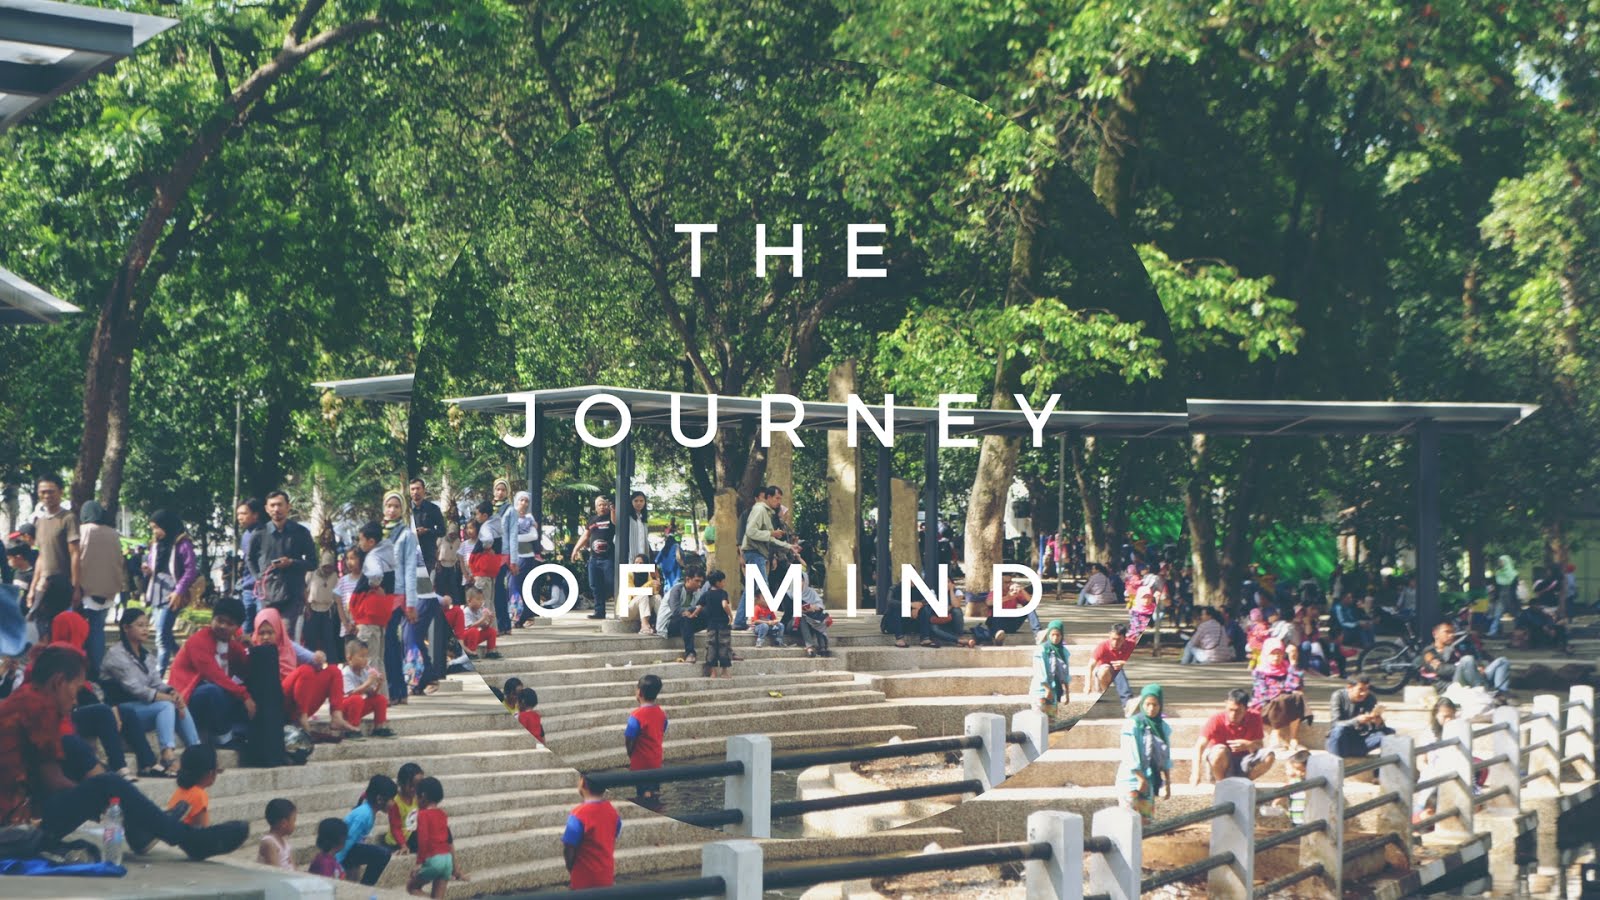 THE JOURNEY OF MIND